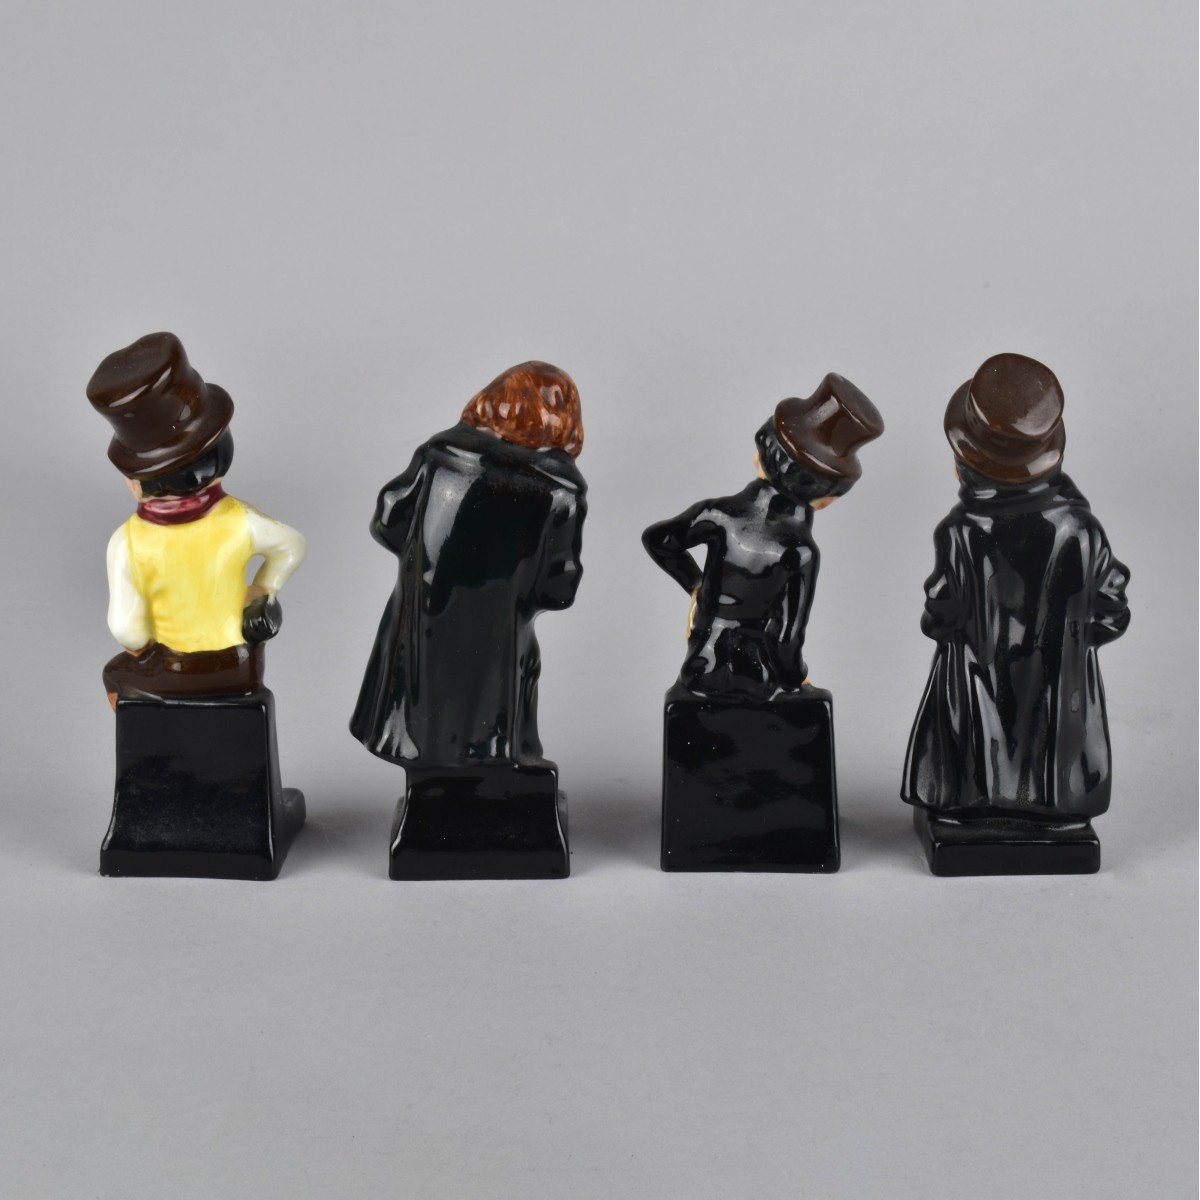 Four (4) Royal Doulton Dickens Figurines